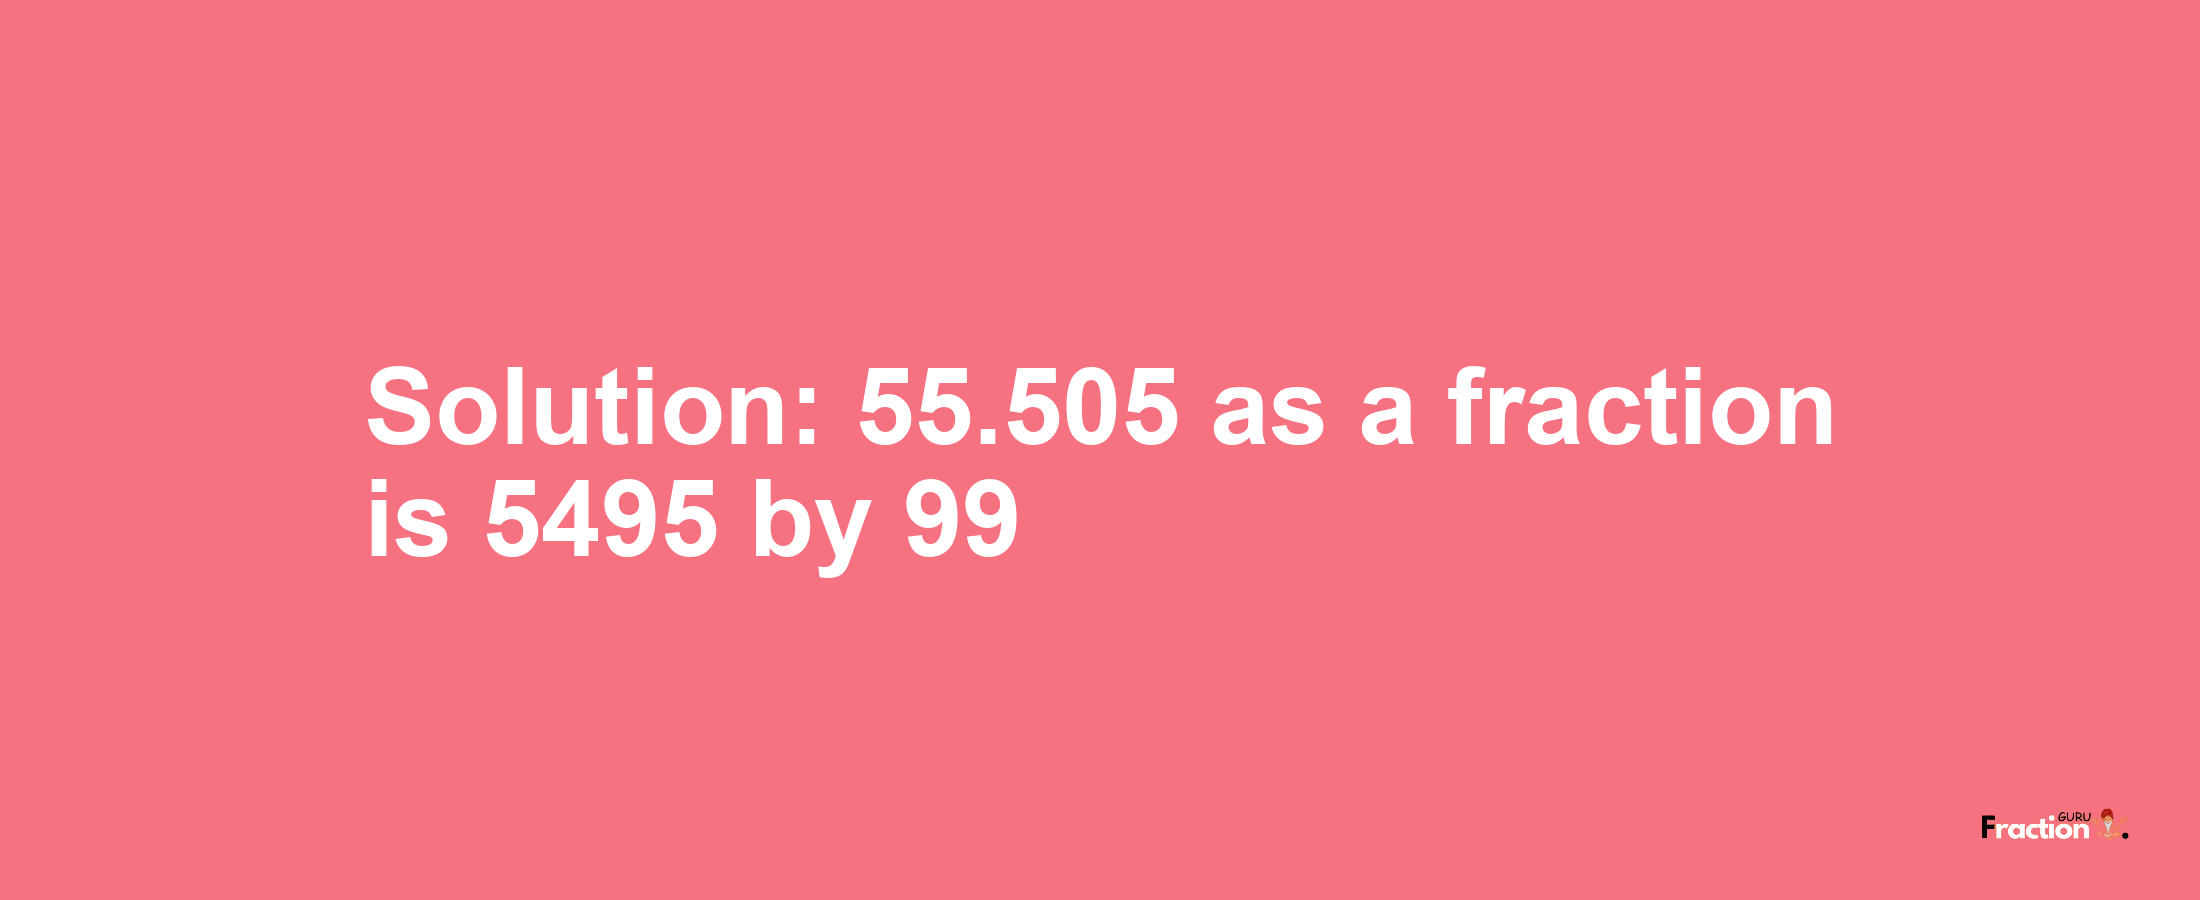 Solution:55.505 as a fraction is 5495/99